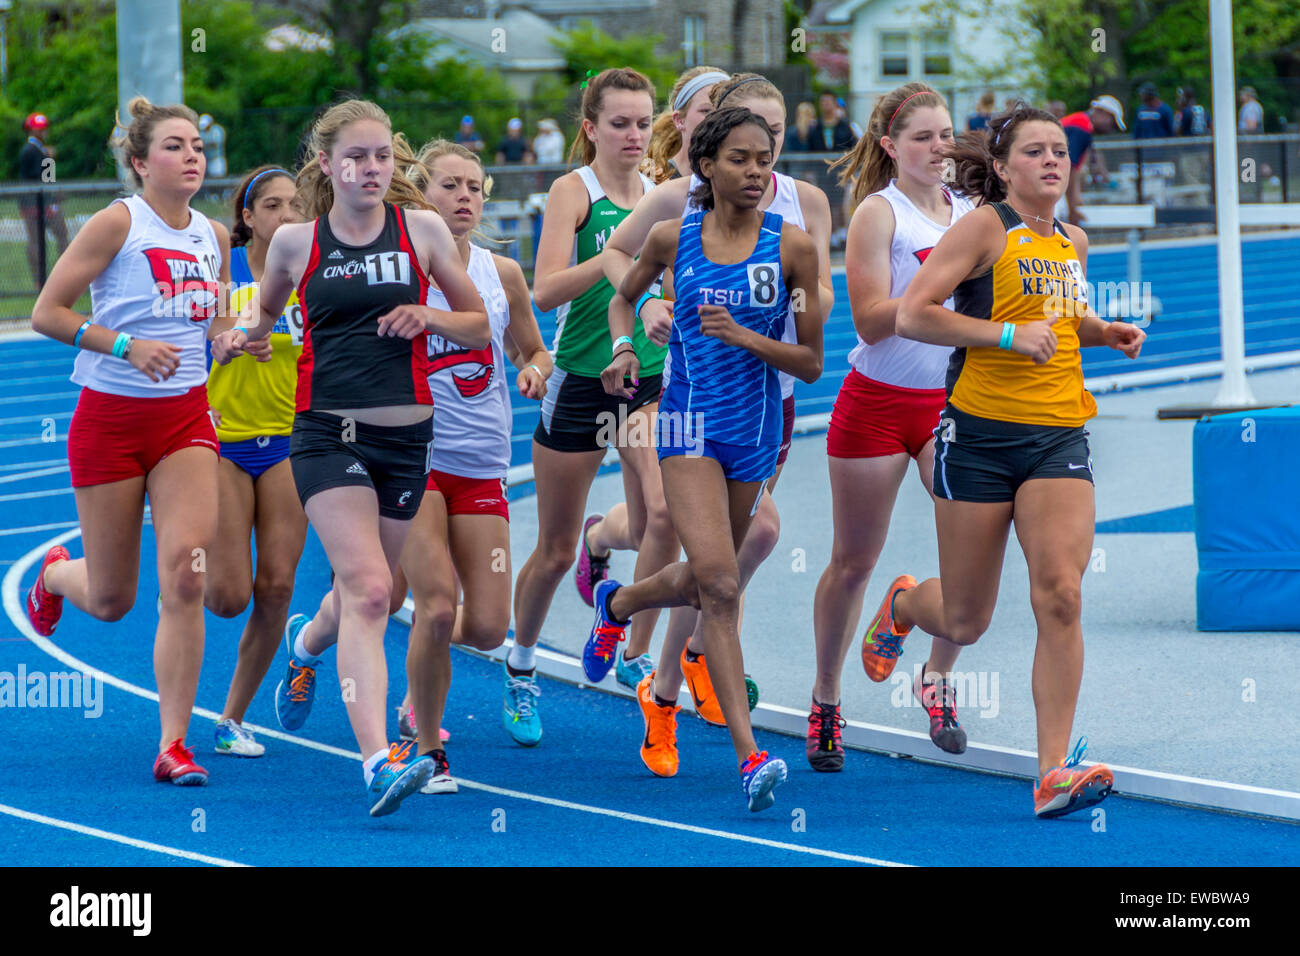 Foot race for women at the Kentucky Relays.  This was held at the University of Kentucky with outdoor track and field Stock Photo